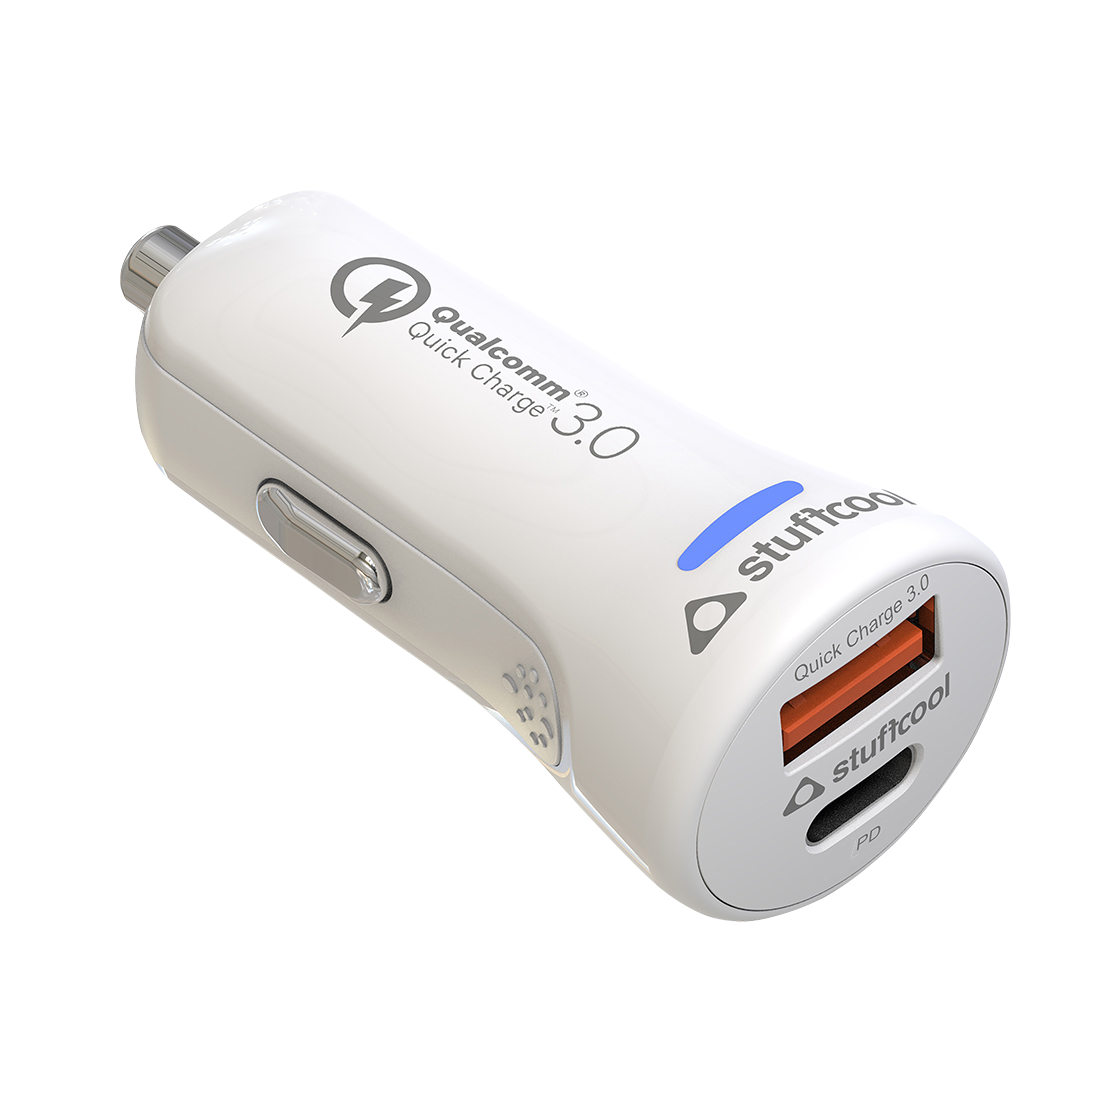 Atom Plus Type-C PD 20W & Quick Charge 3.0 Car Charger - Grab Your Gadget